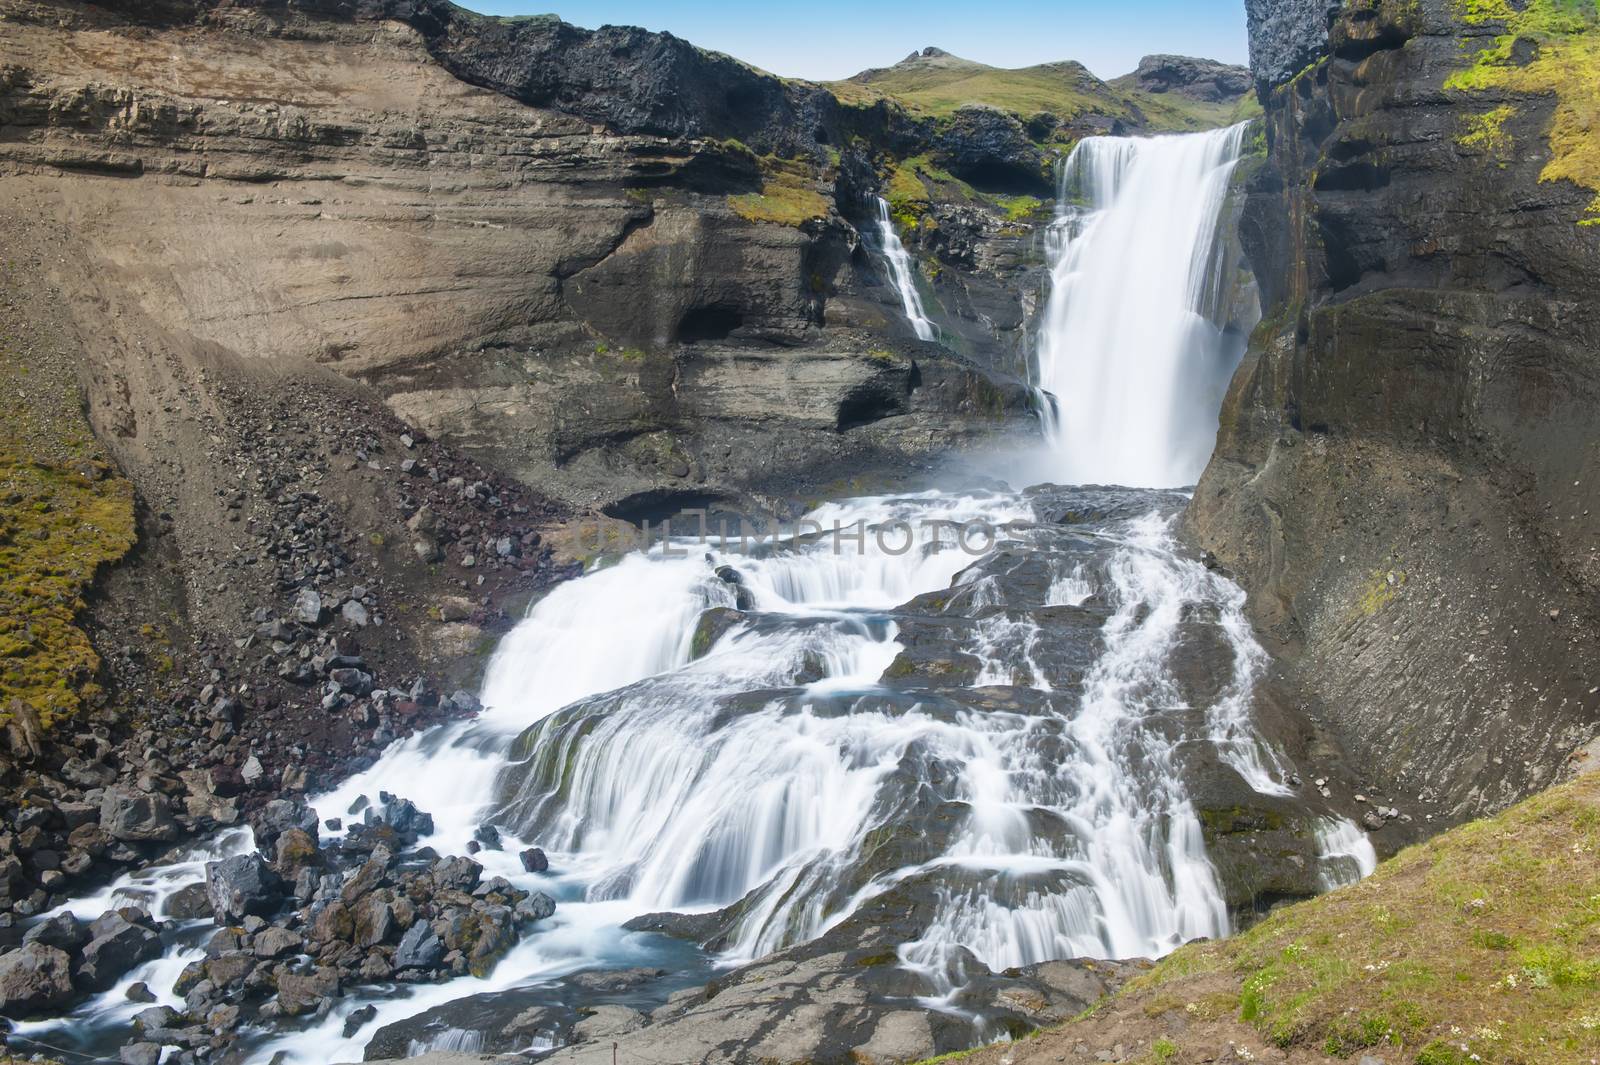 Beautiful Icelandic waterfall Ofaerufoss in Eldgja. It is located on the South of the island.